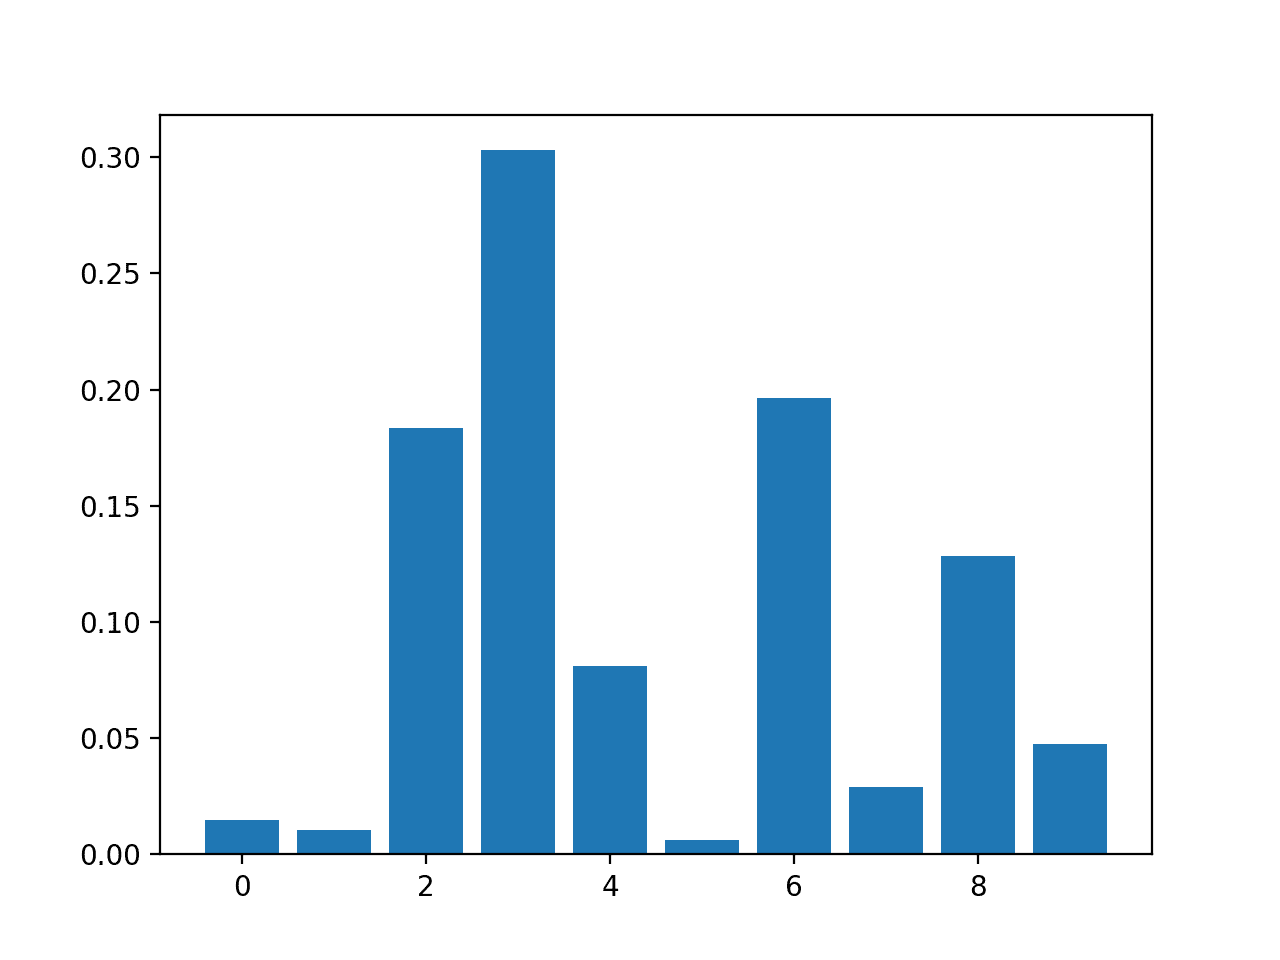 Bar Chart of DecisionTreeClassifier Feature Importance Scores